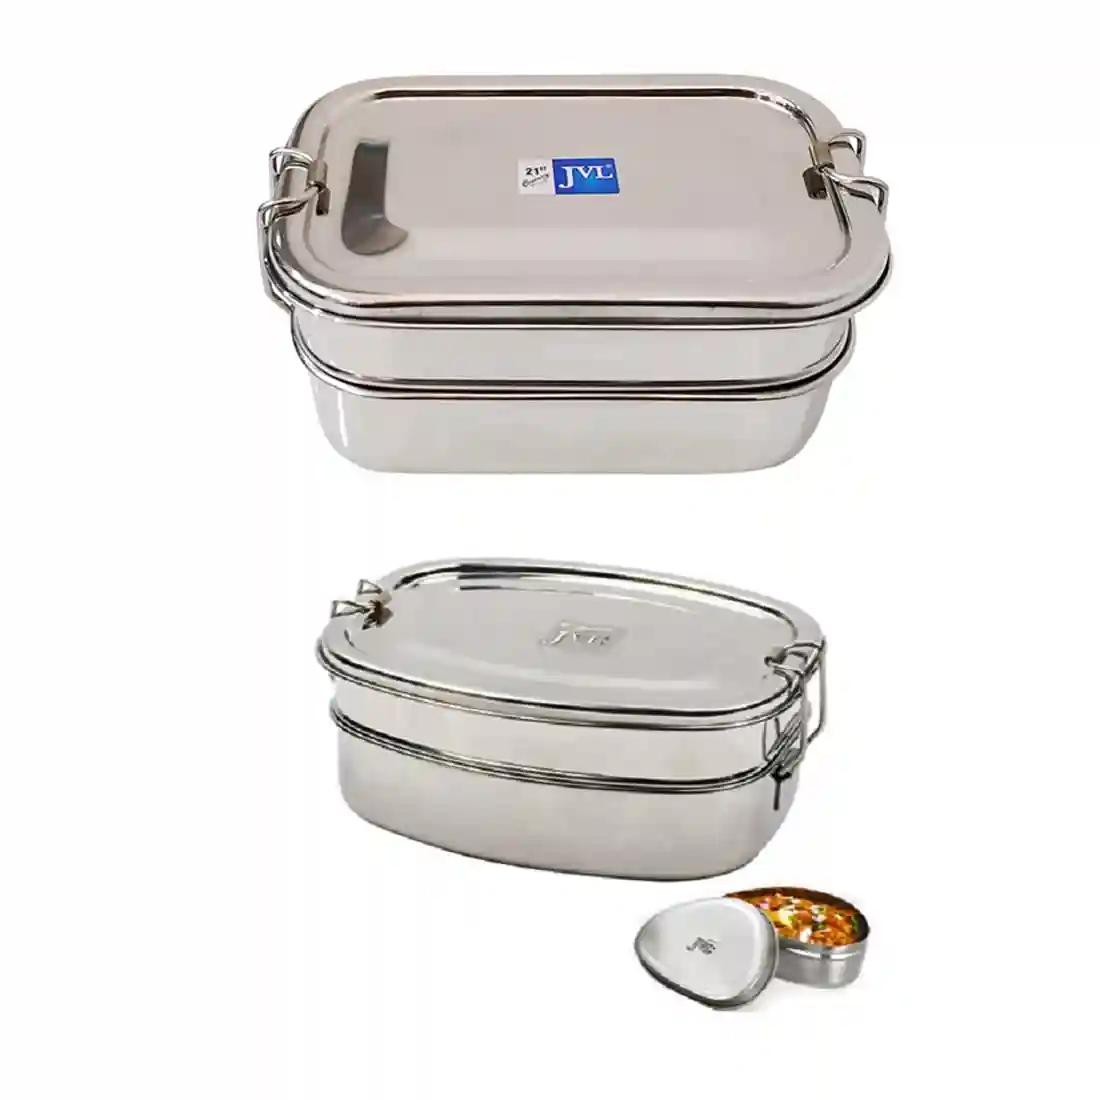 Jvl Stainless Steel Rectangular Shape Double Layer Lunch Box With Inner Plate & Small Deluxe Lunch Box With Mini Container Not Leak Proof - Pack Of 2